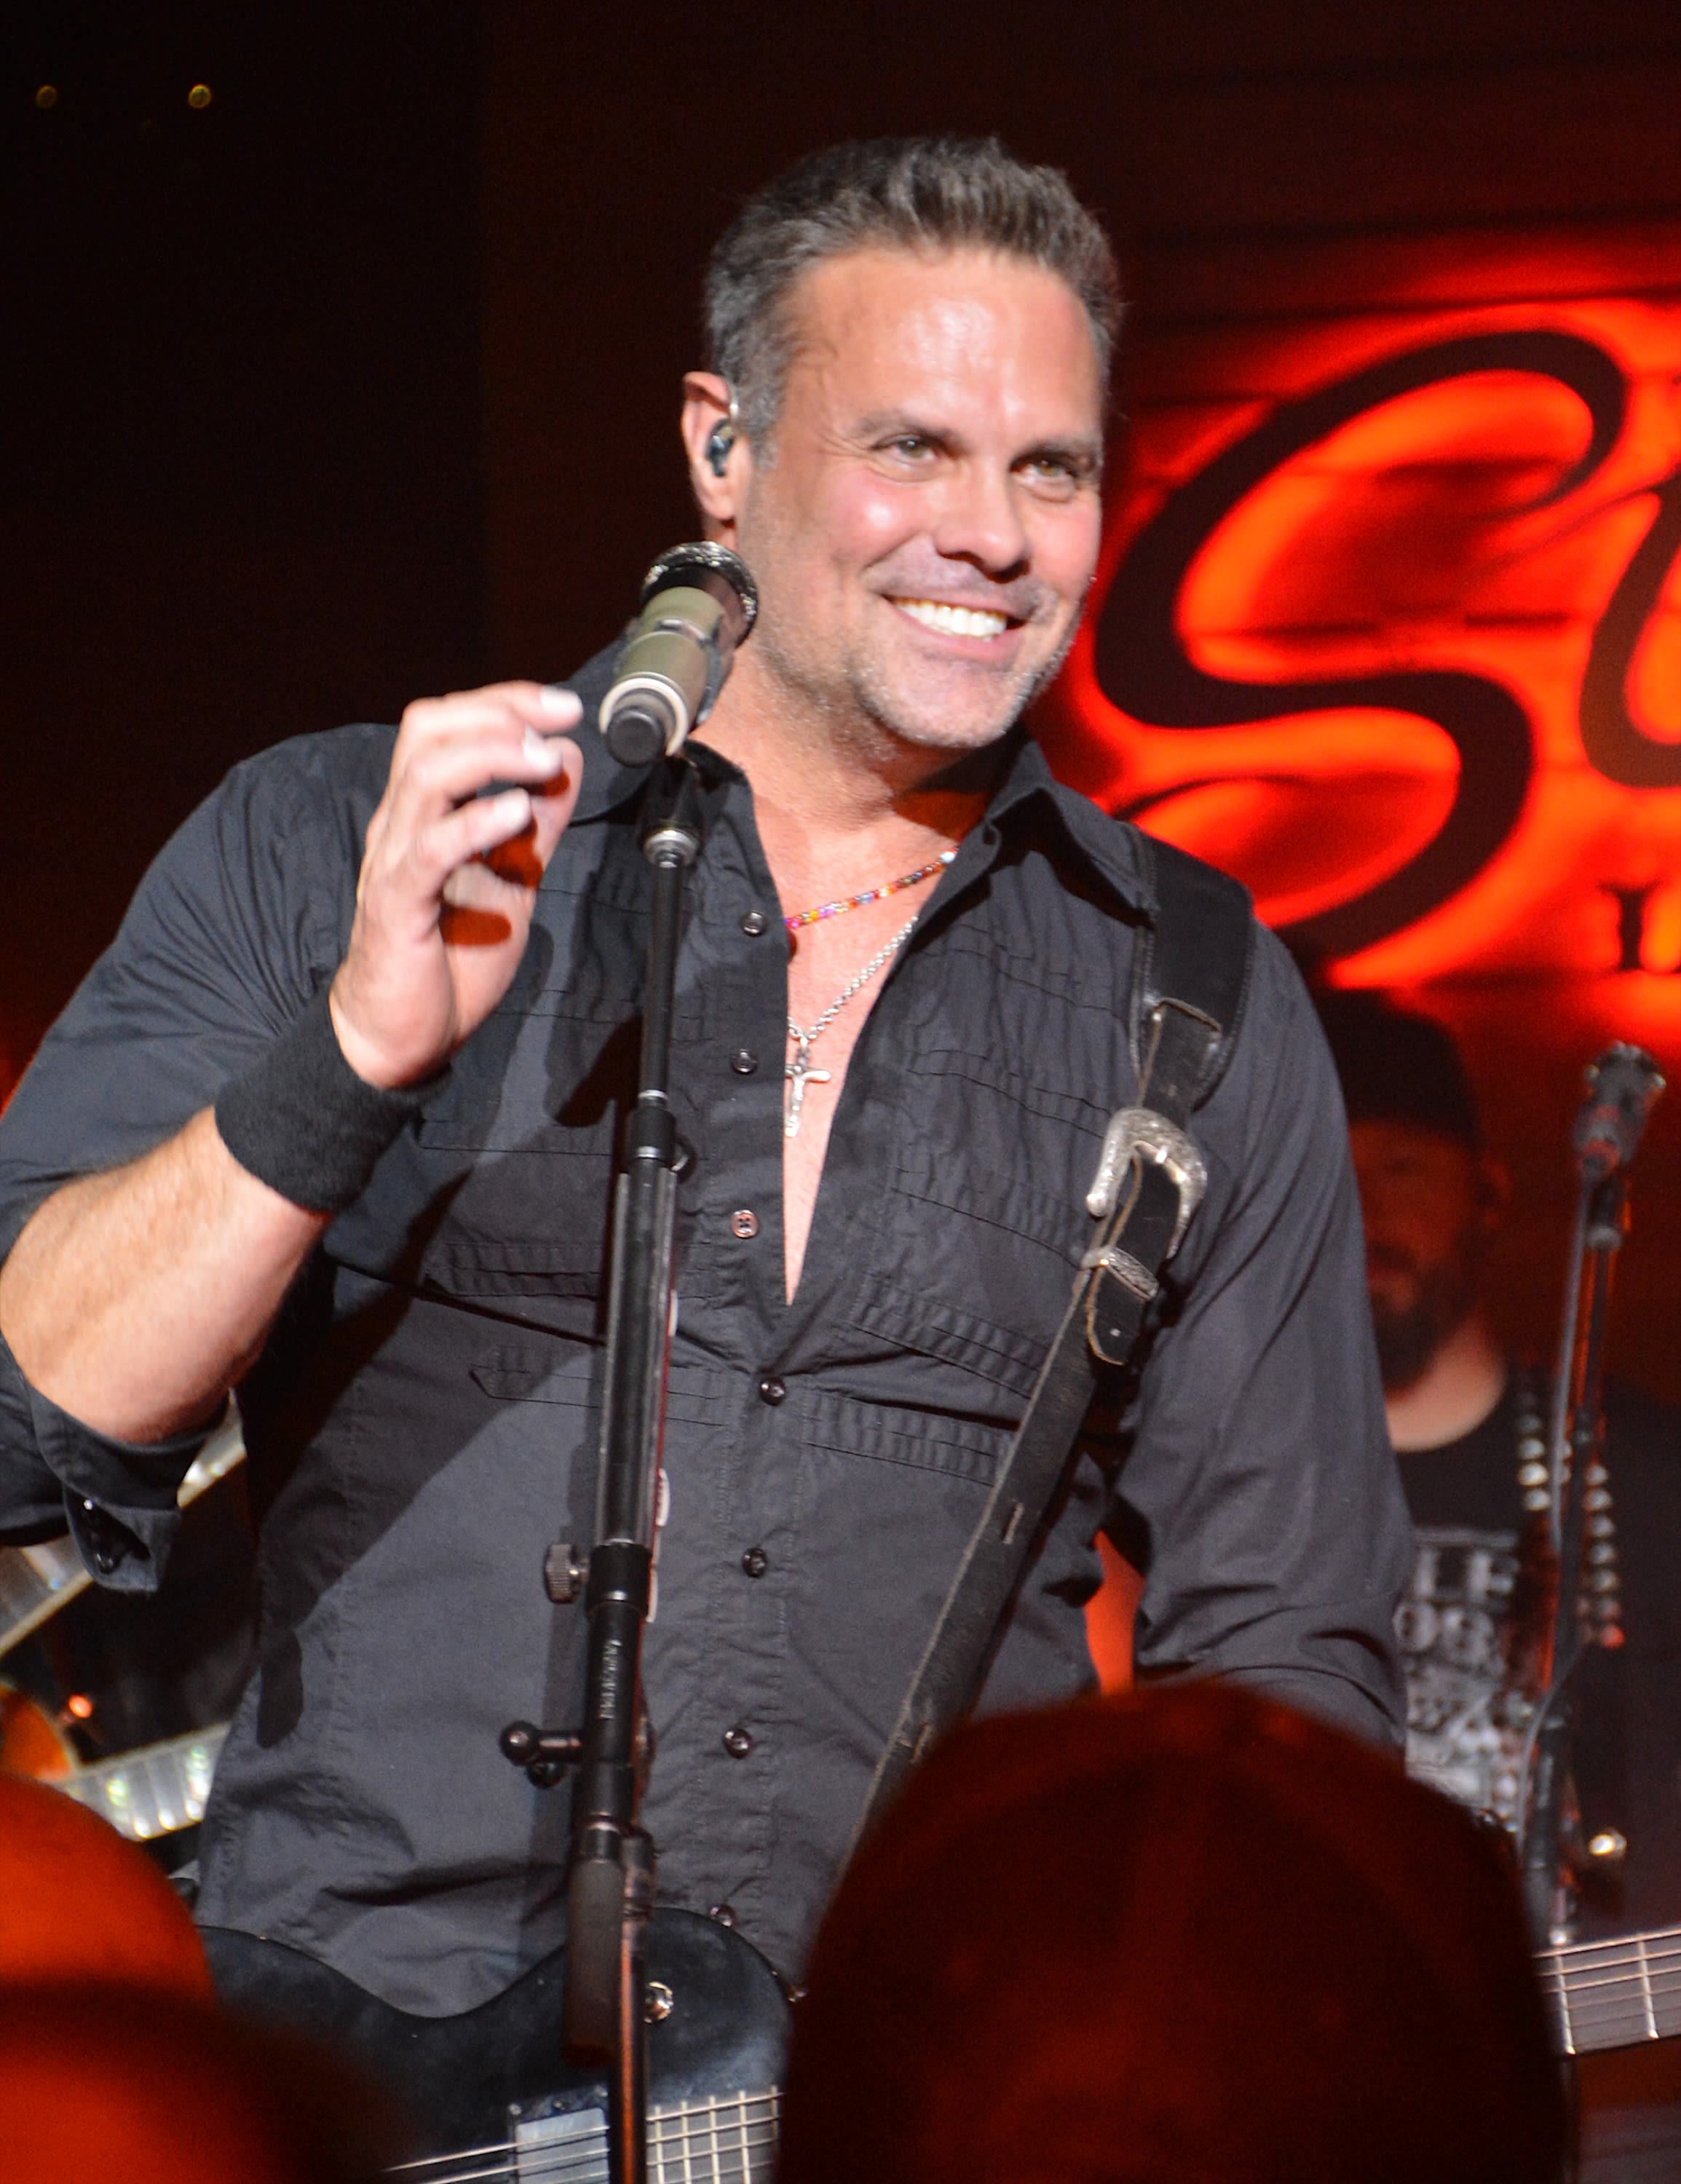 Troy Gentry killed in helicopter crash | CNN